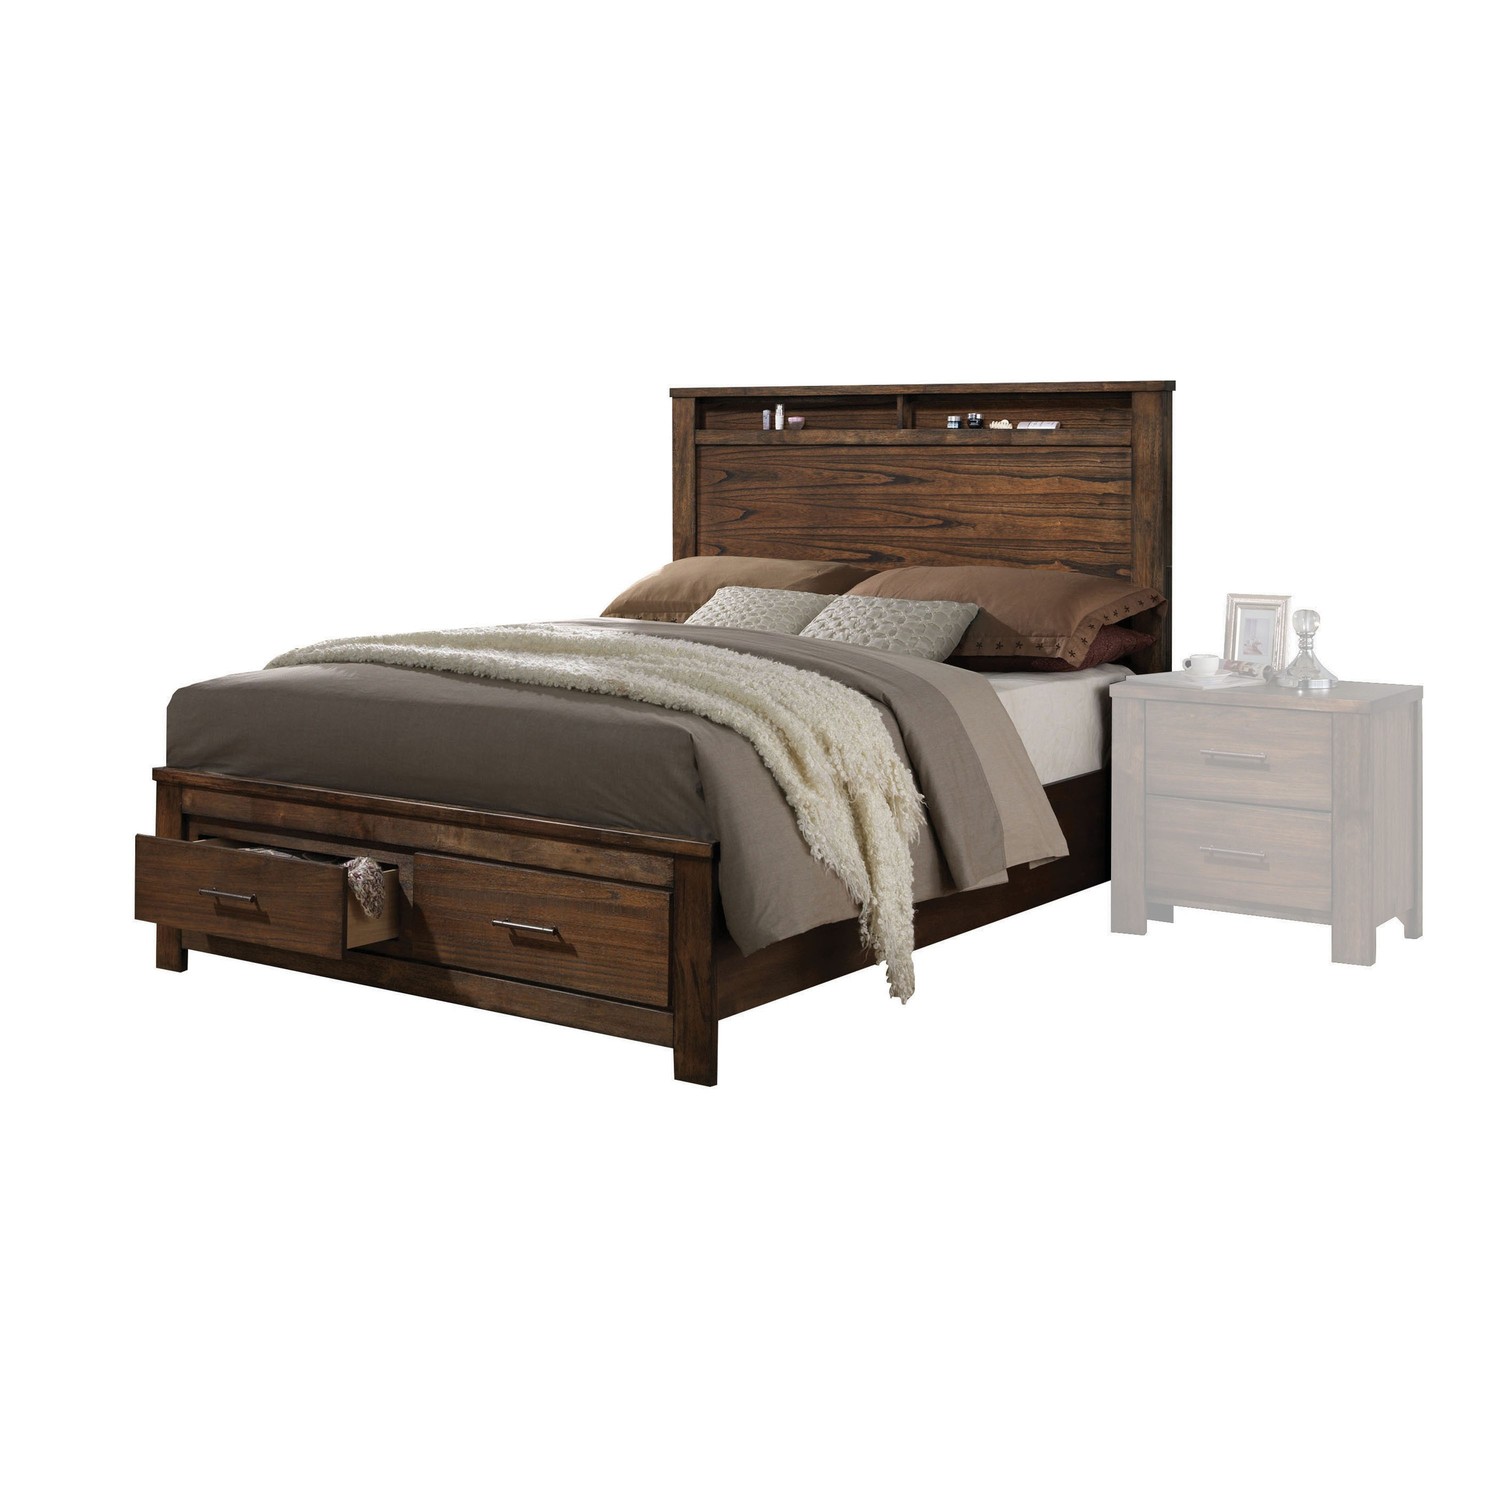 Oak Finish Queen Bed with Storage Headboard and Footboard